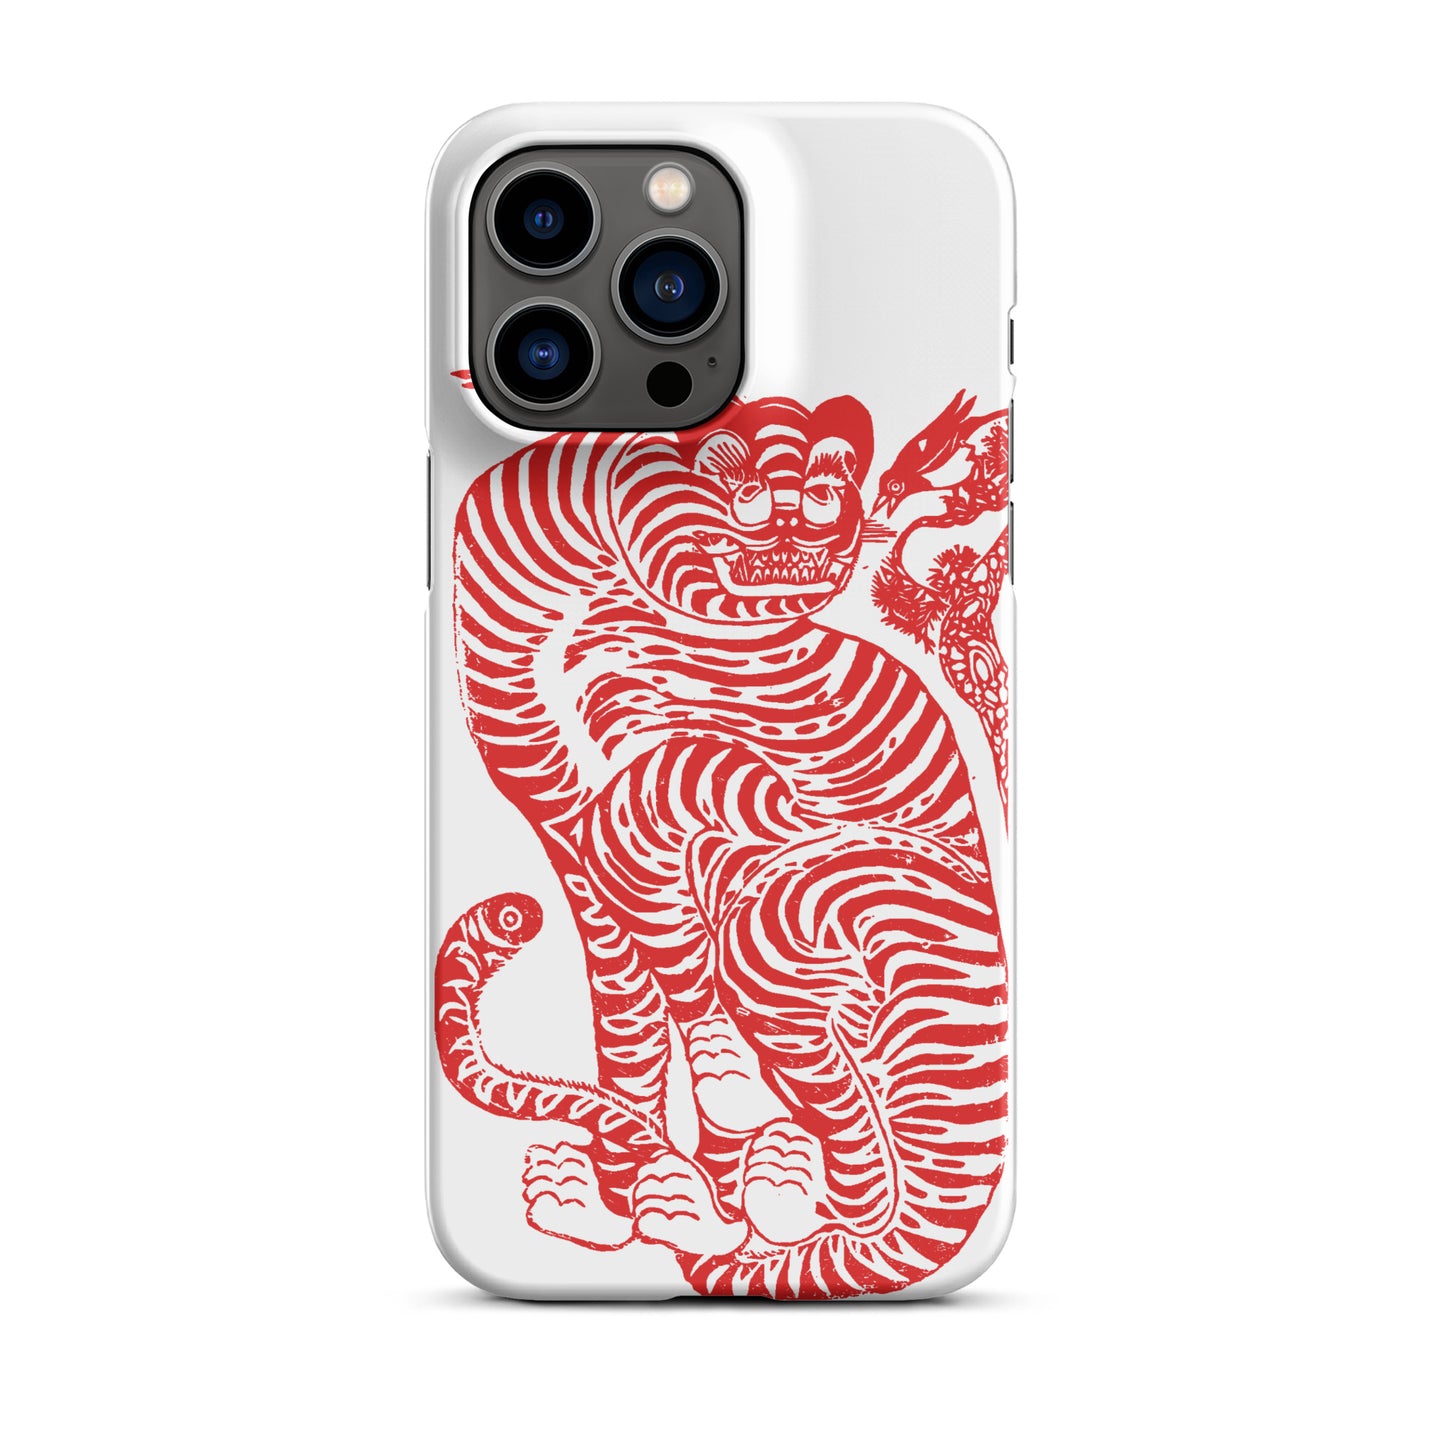 The Tiger case for iPhone®